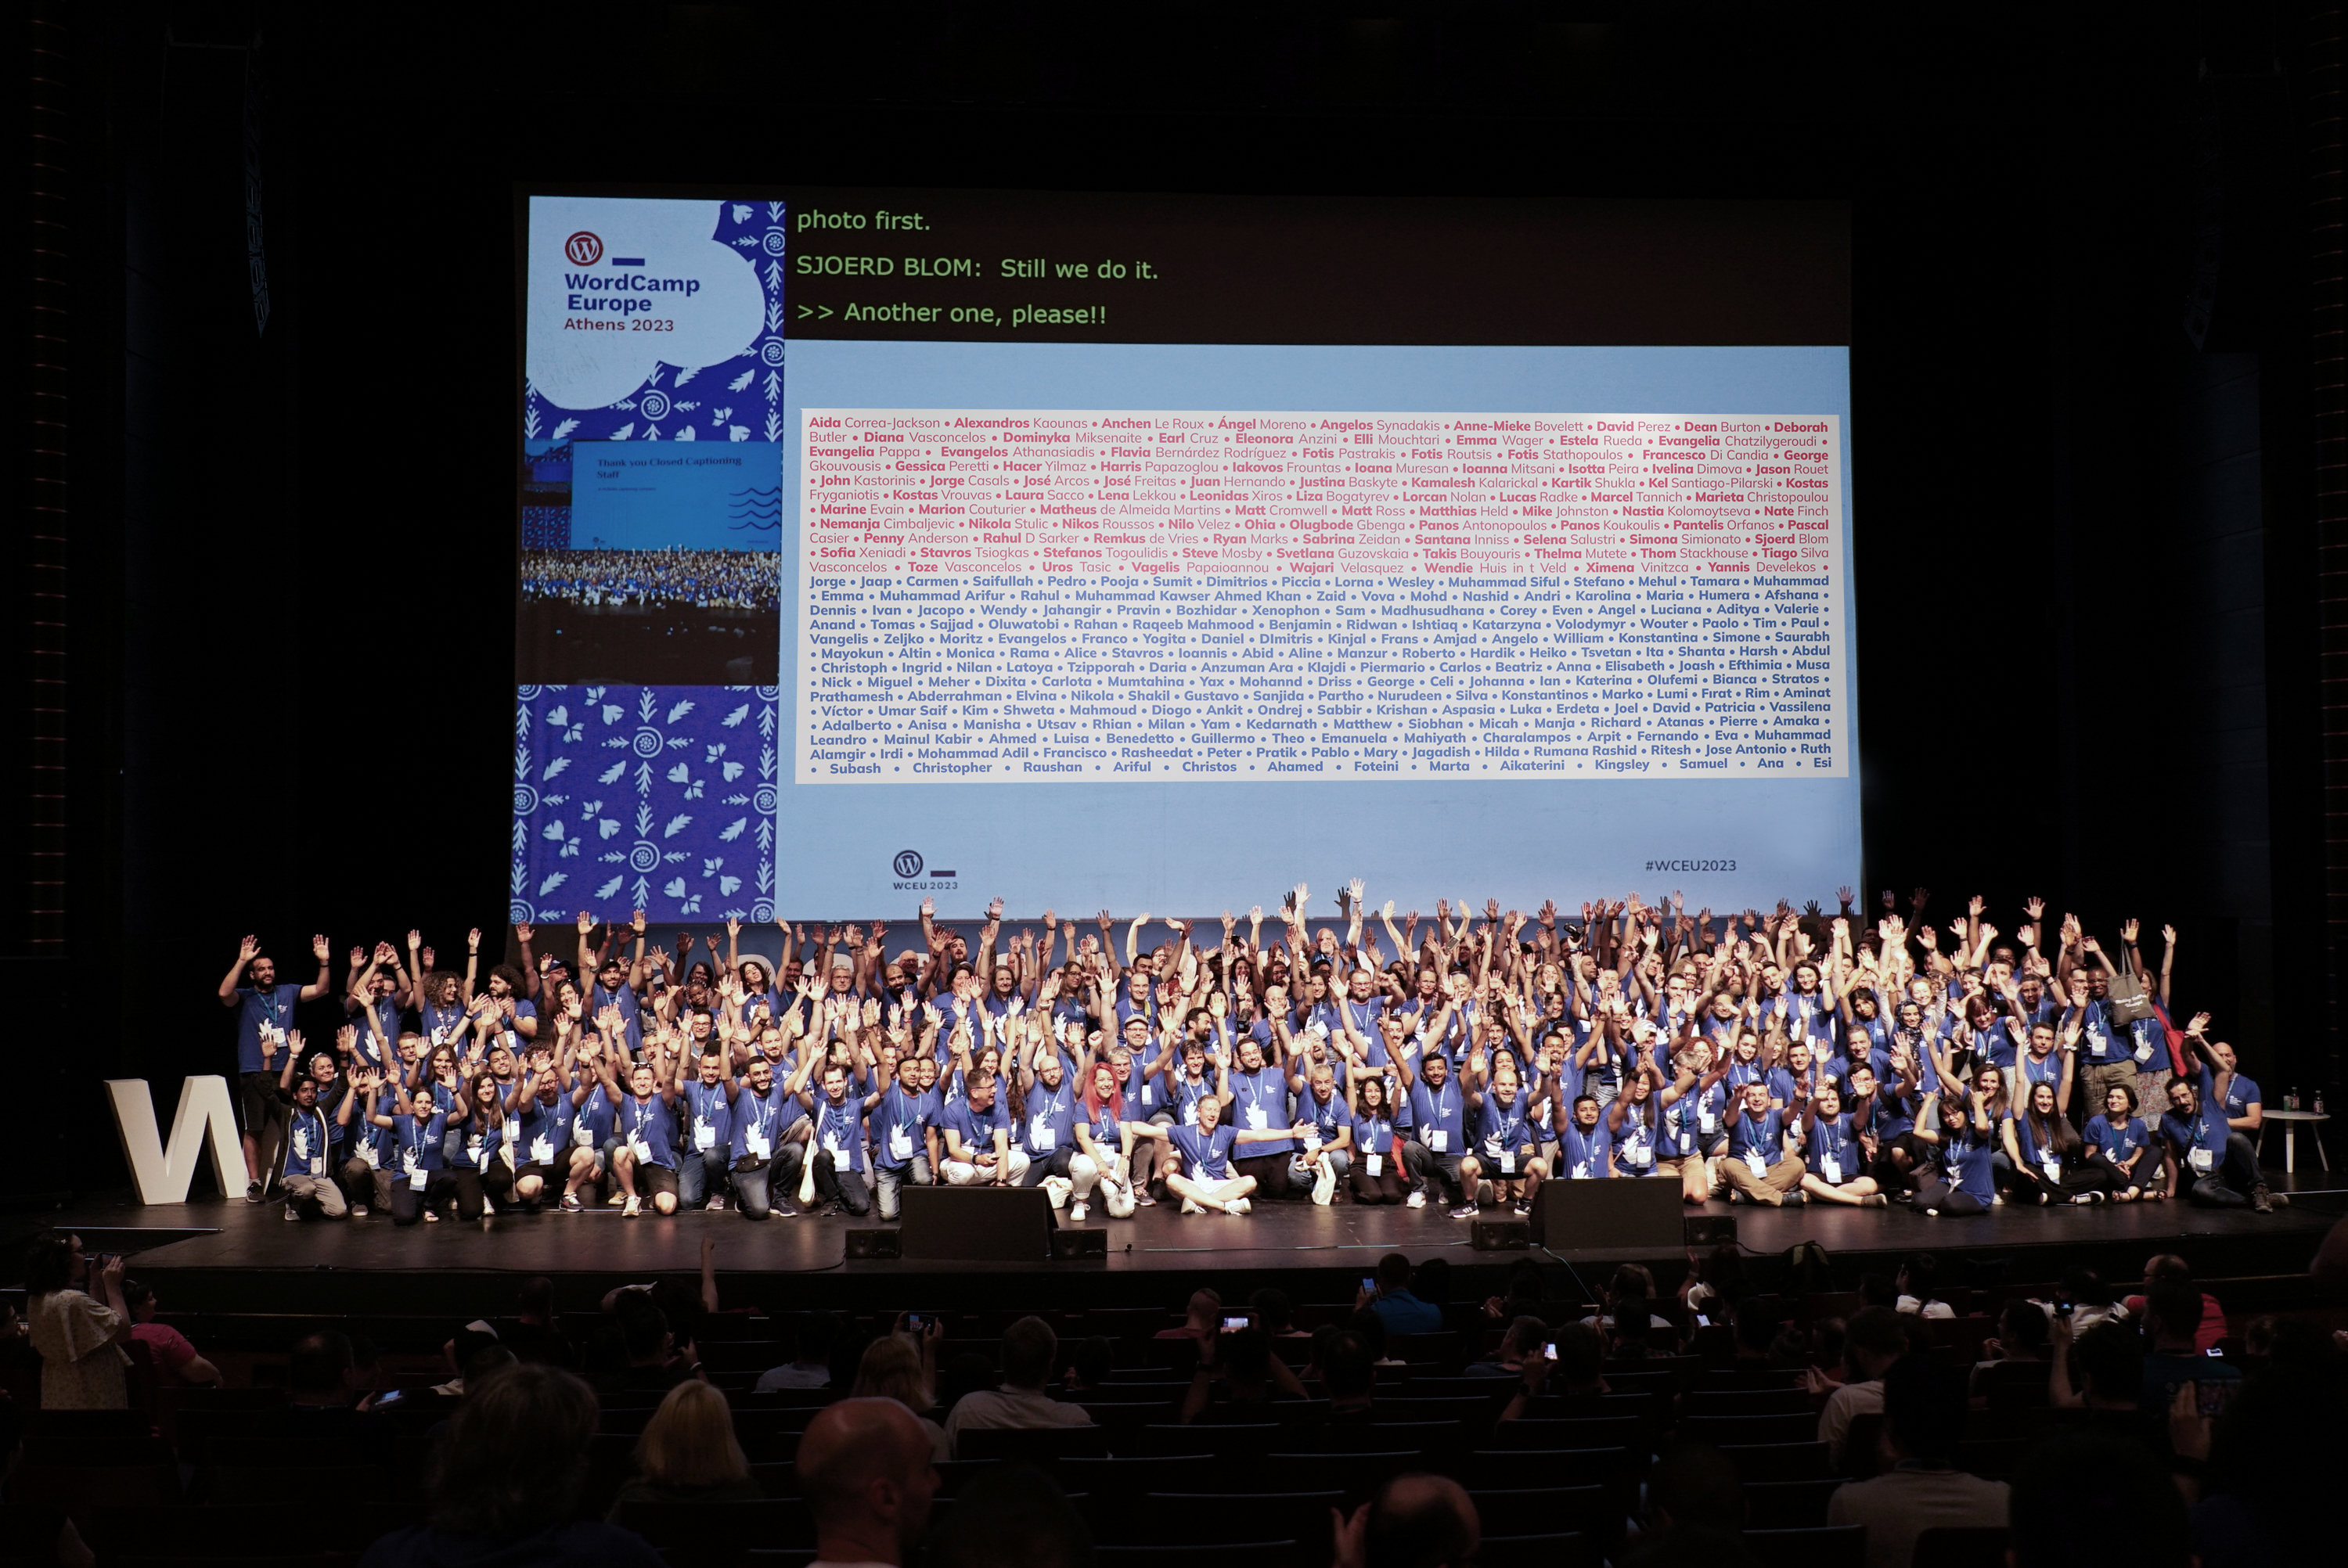 Thank you from WordCamp Europe 2023!